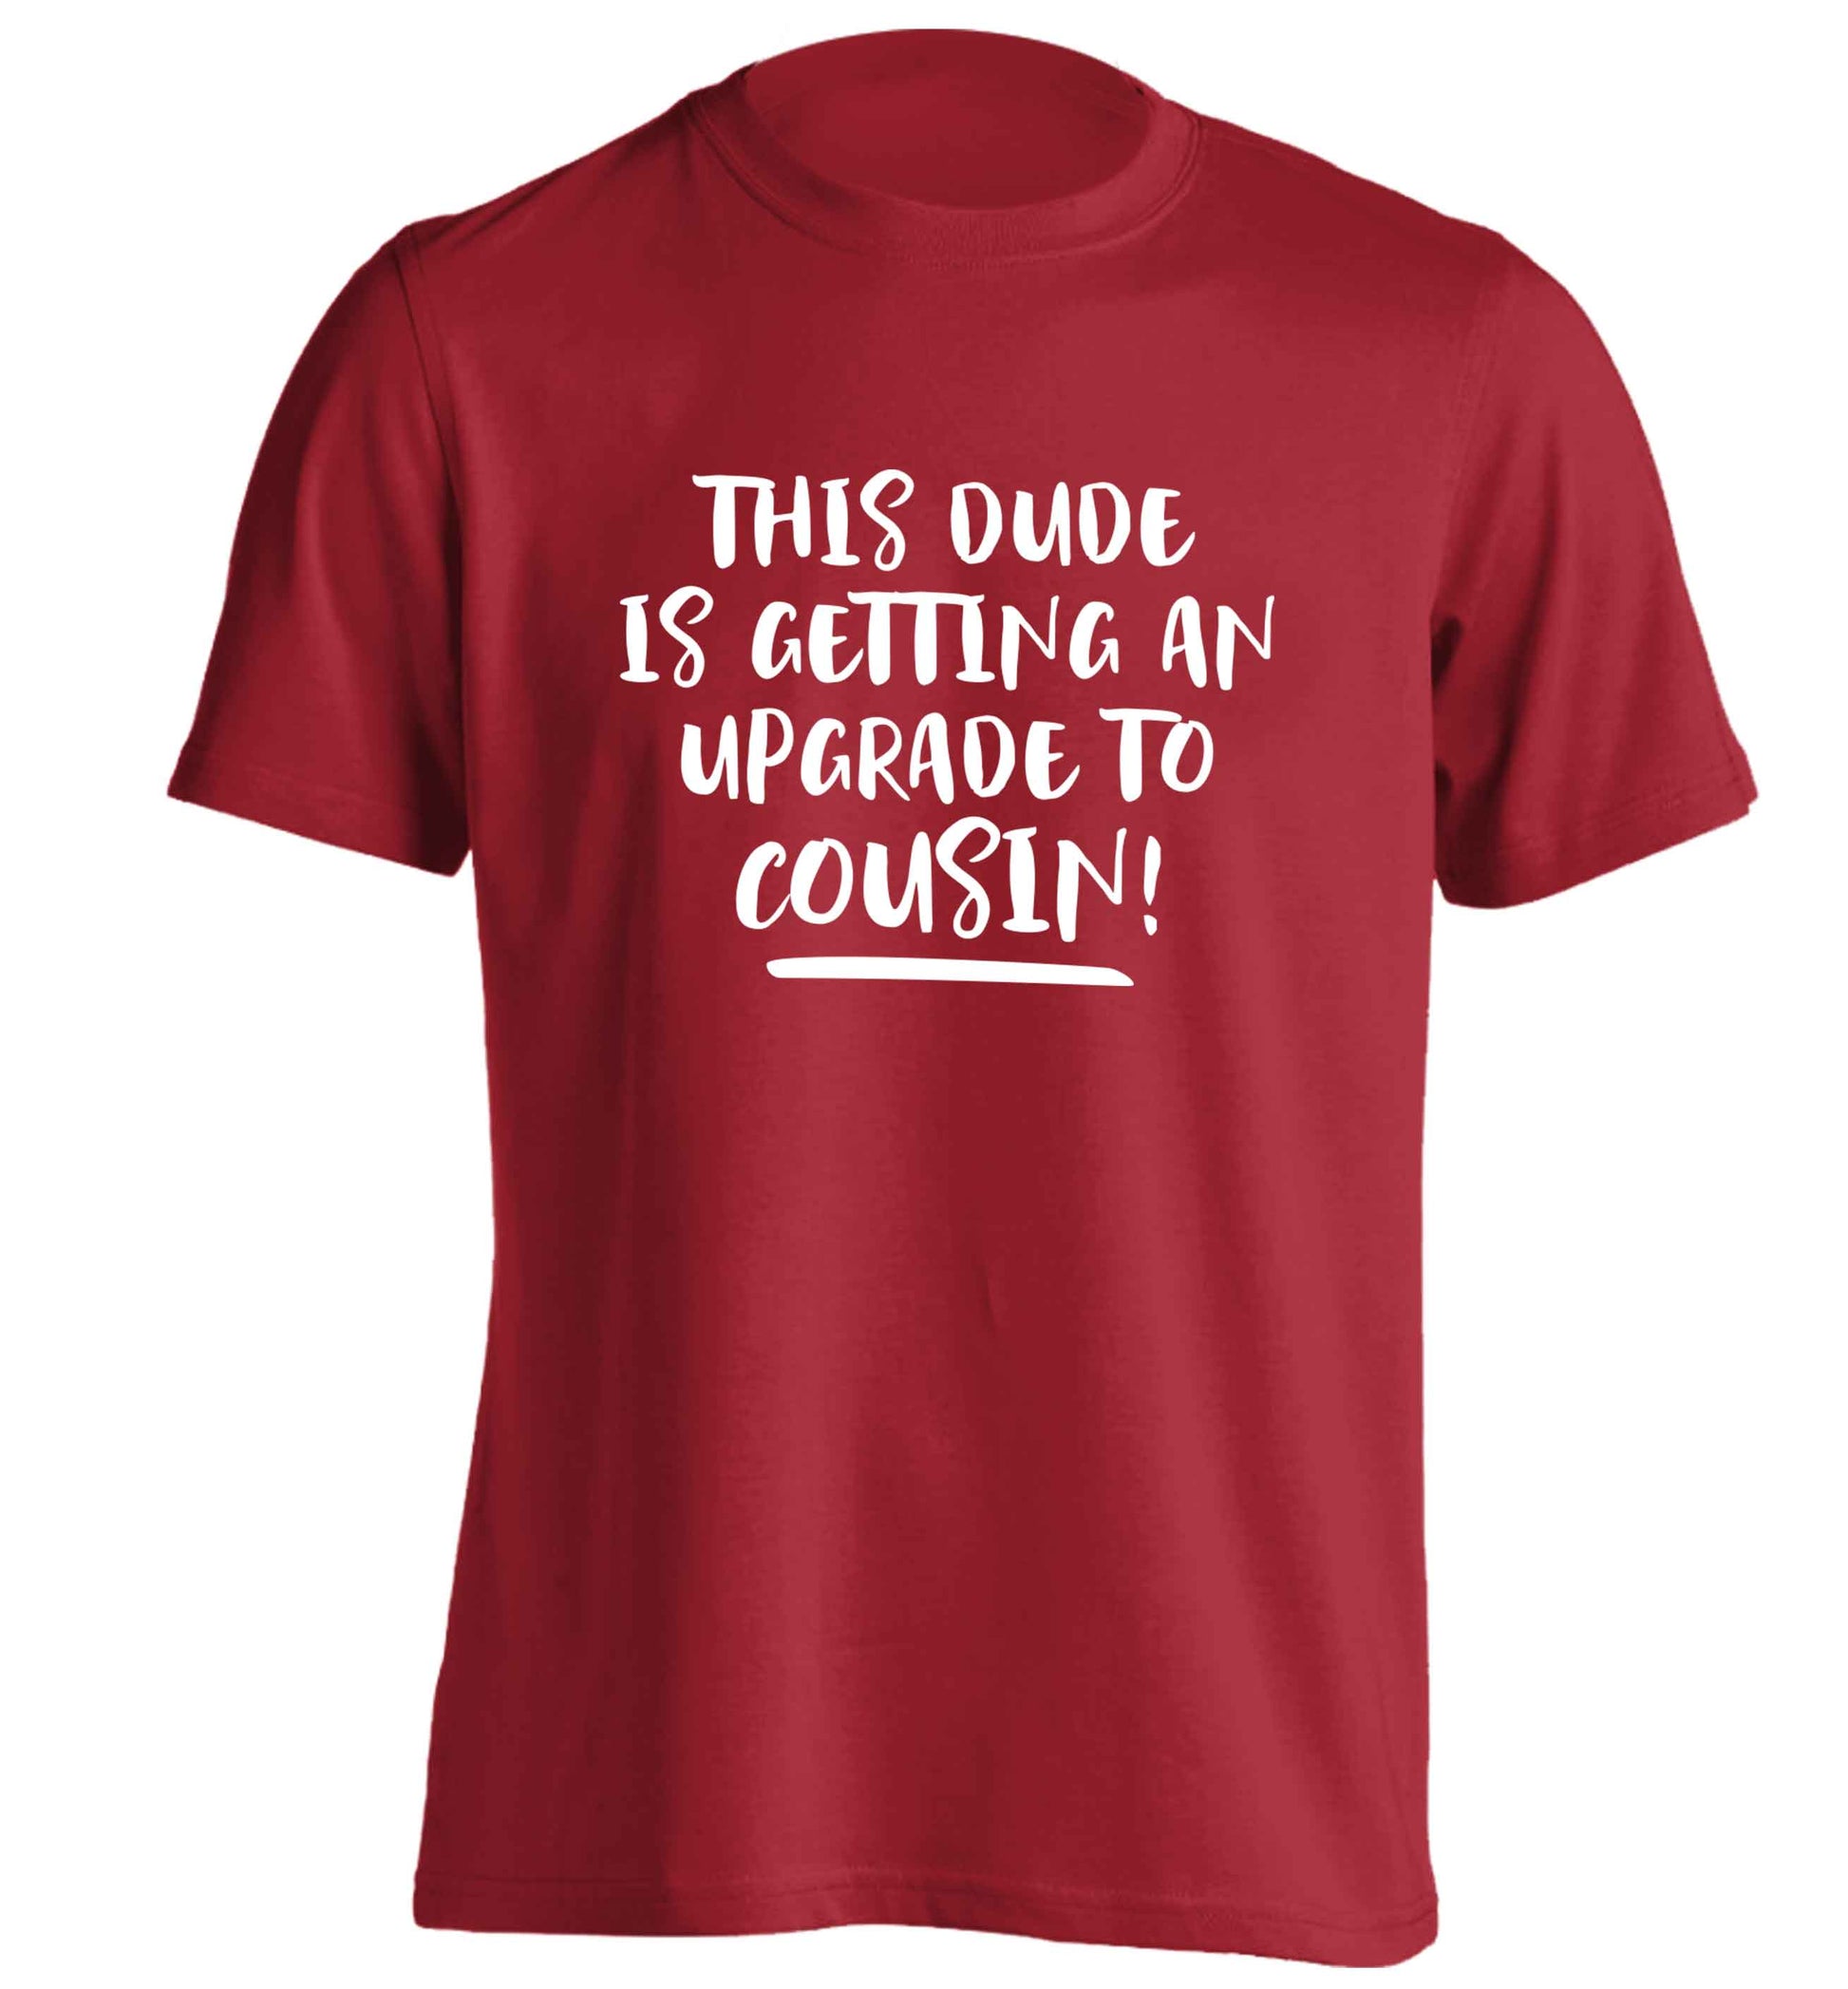 This dude is getting an upgrade to cousin! adults unisex red Tshirt 2XL